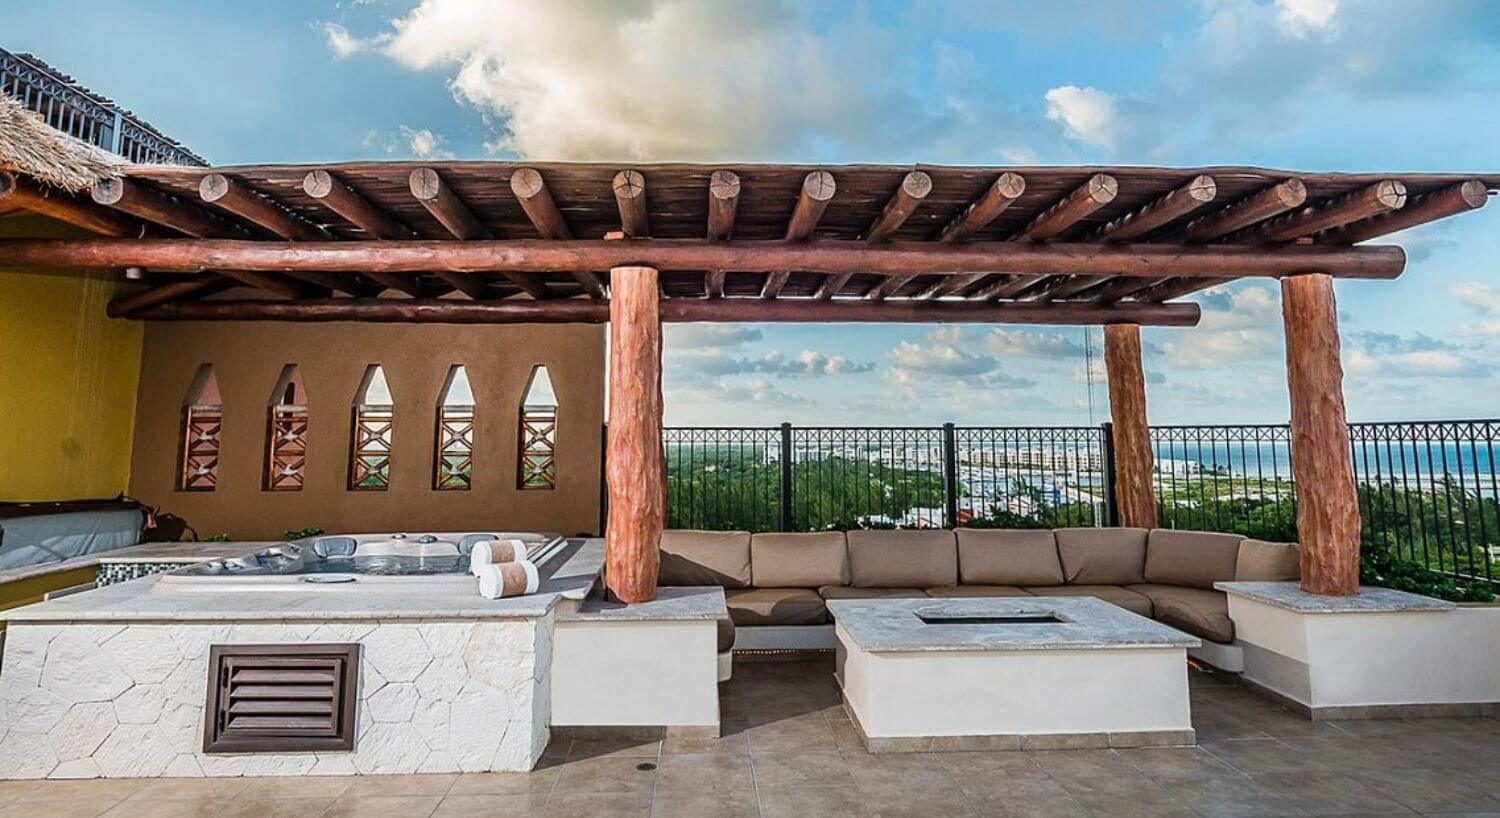 As expansive terrace with an outdoor living area with sofas, a fire pit, and an outdoor hot tub.